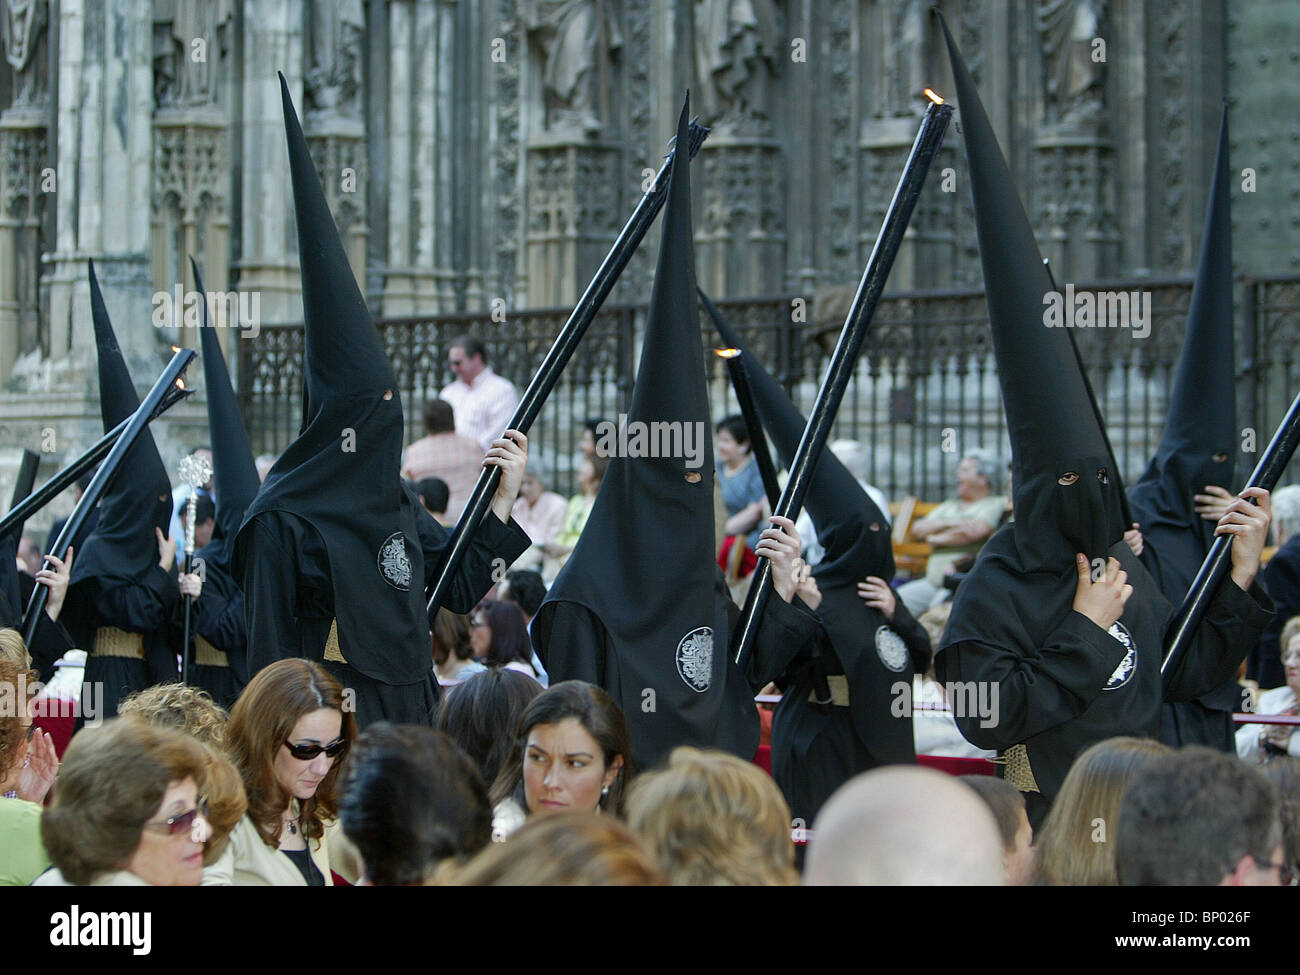 Black hooded members of a Brotherhood during the Semana Santa processions in Seville, southern Spain on April 6, 2004. Stock Photo